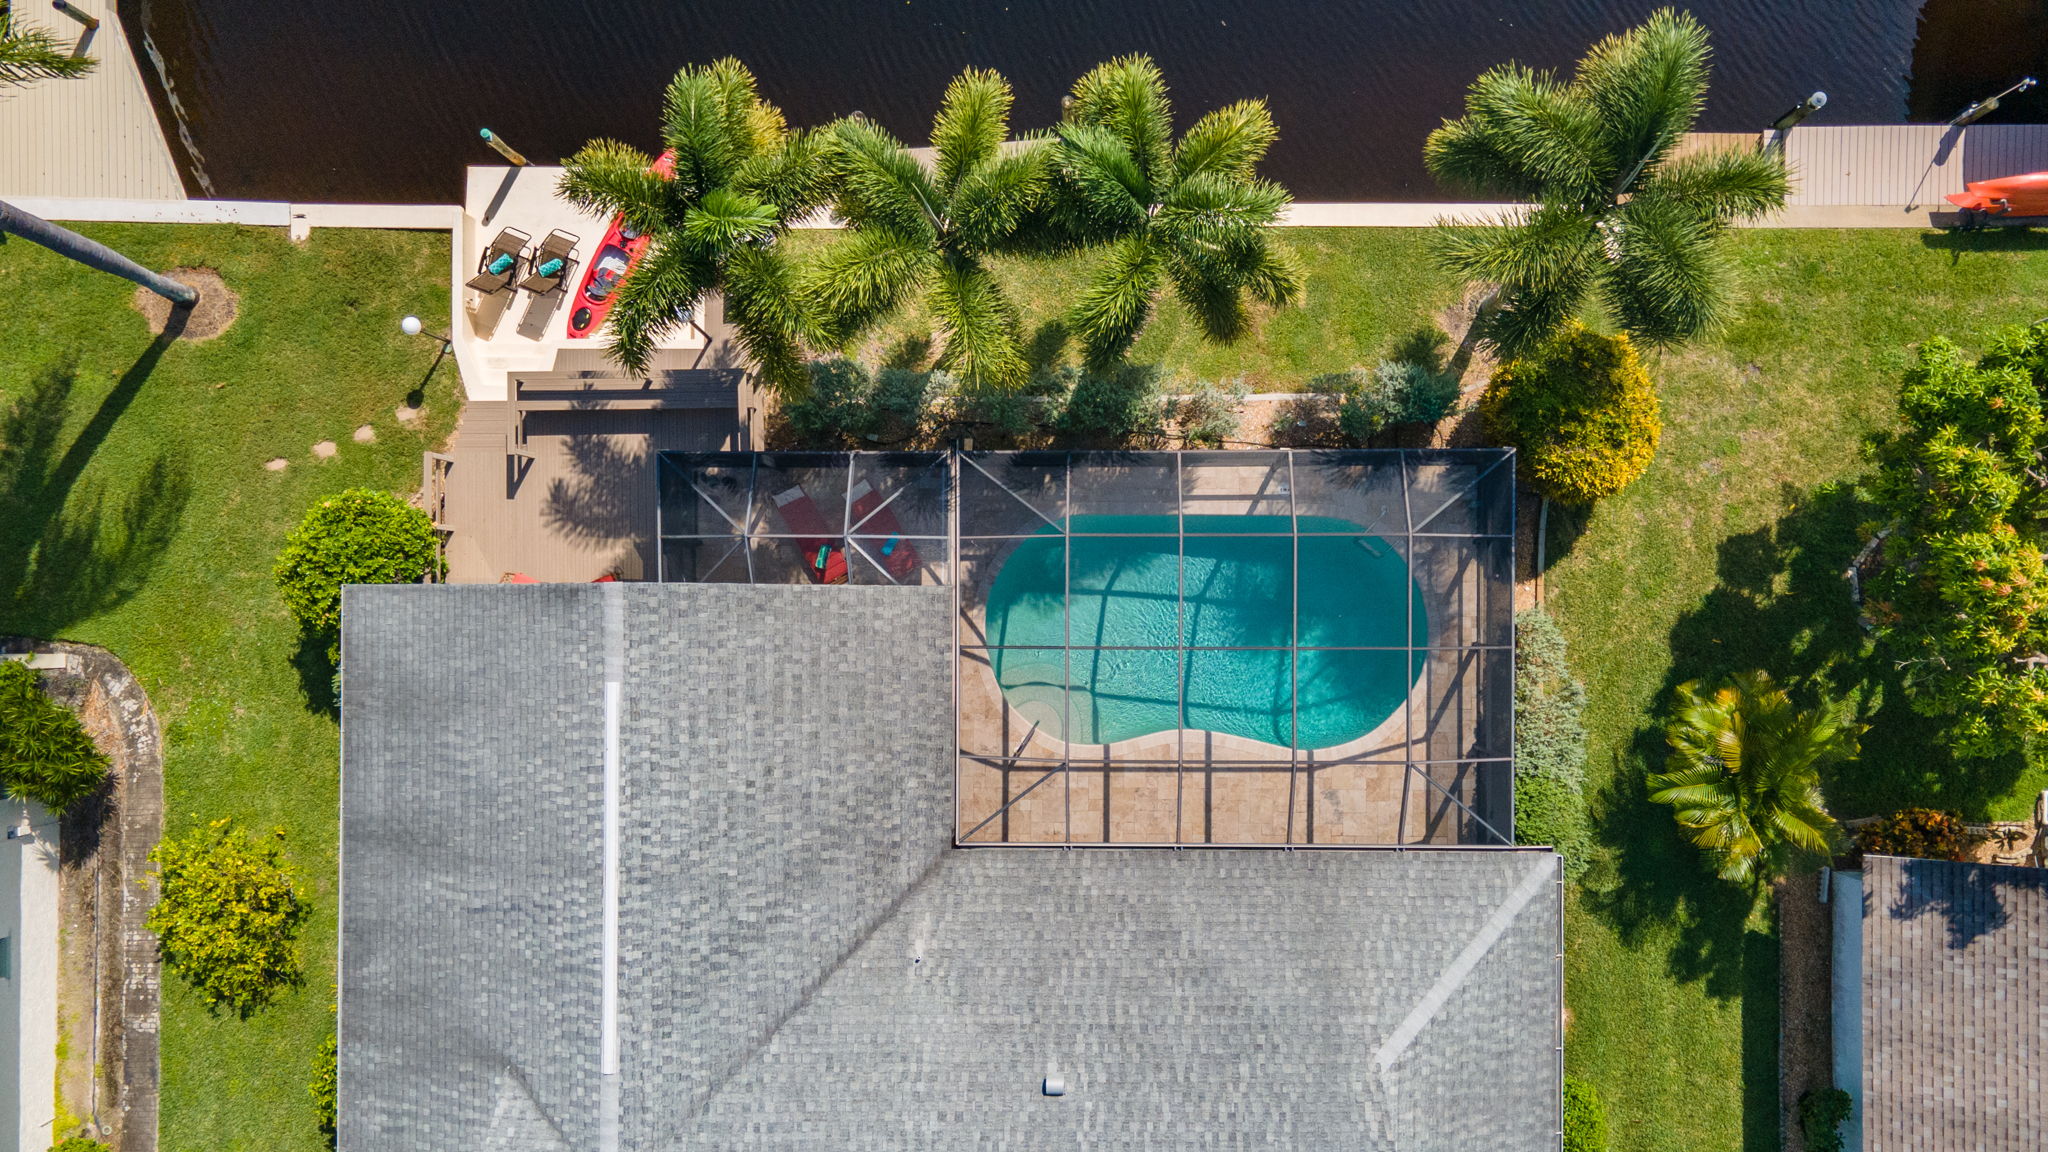 Property Image 2 - The Steak Out, Cape Coral